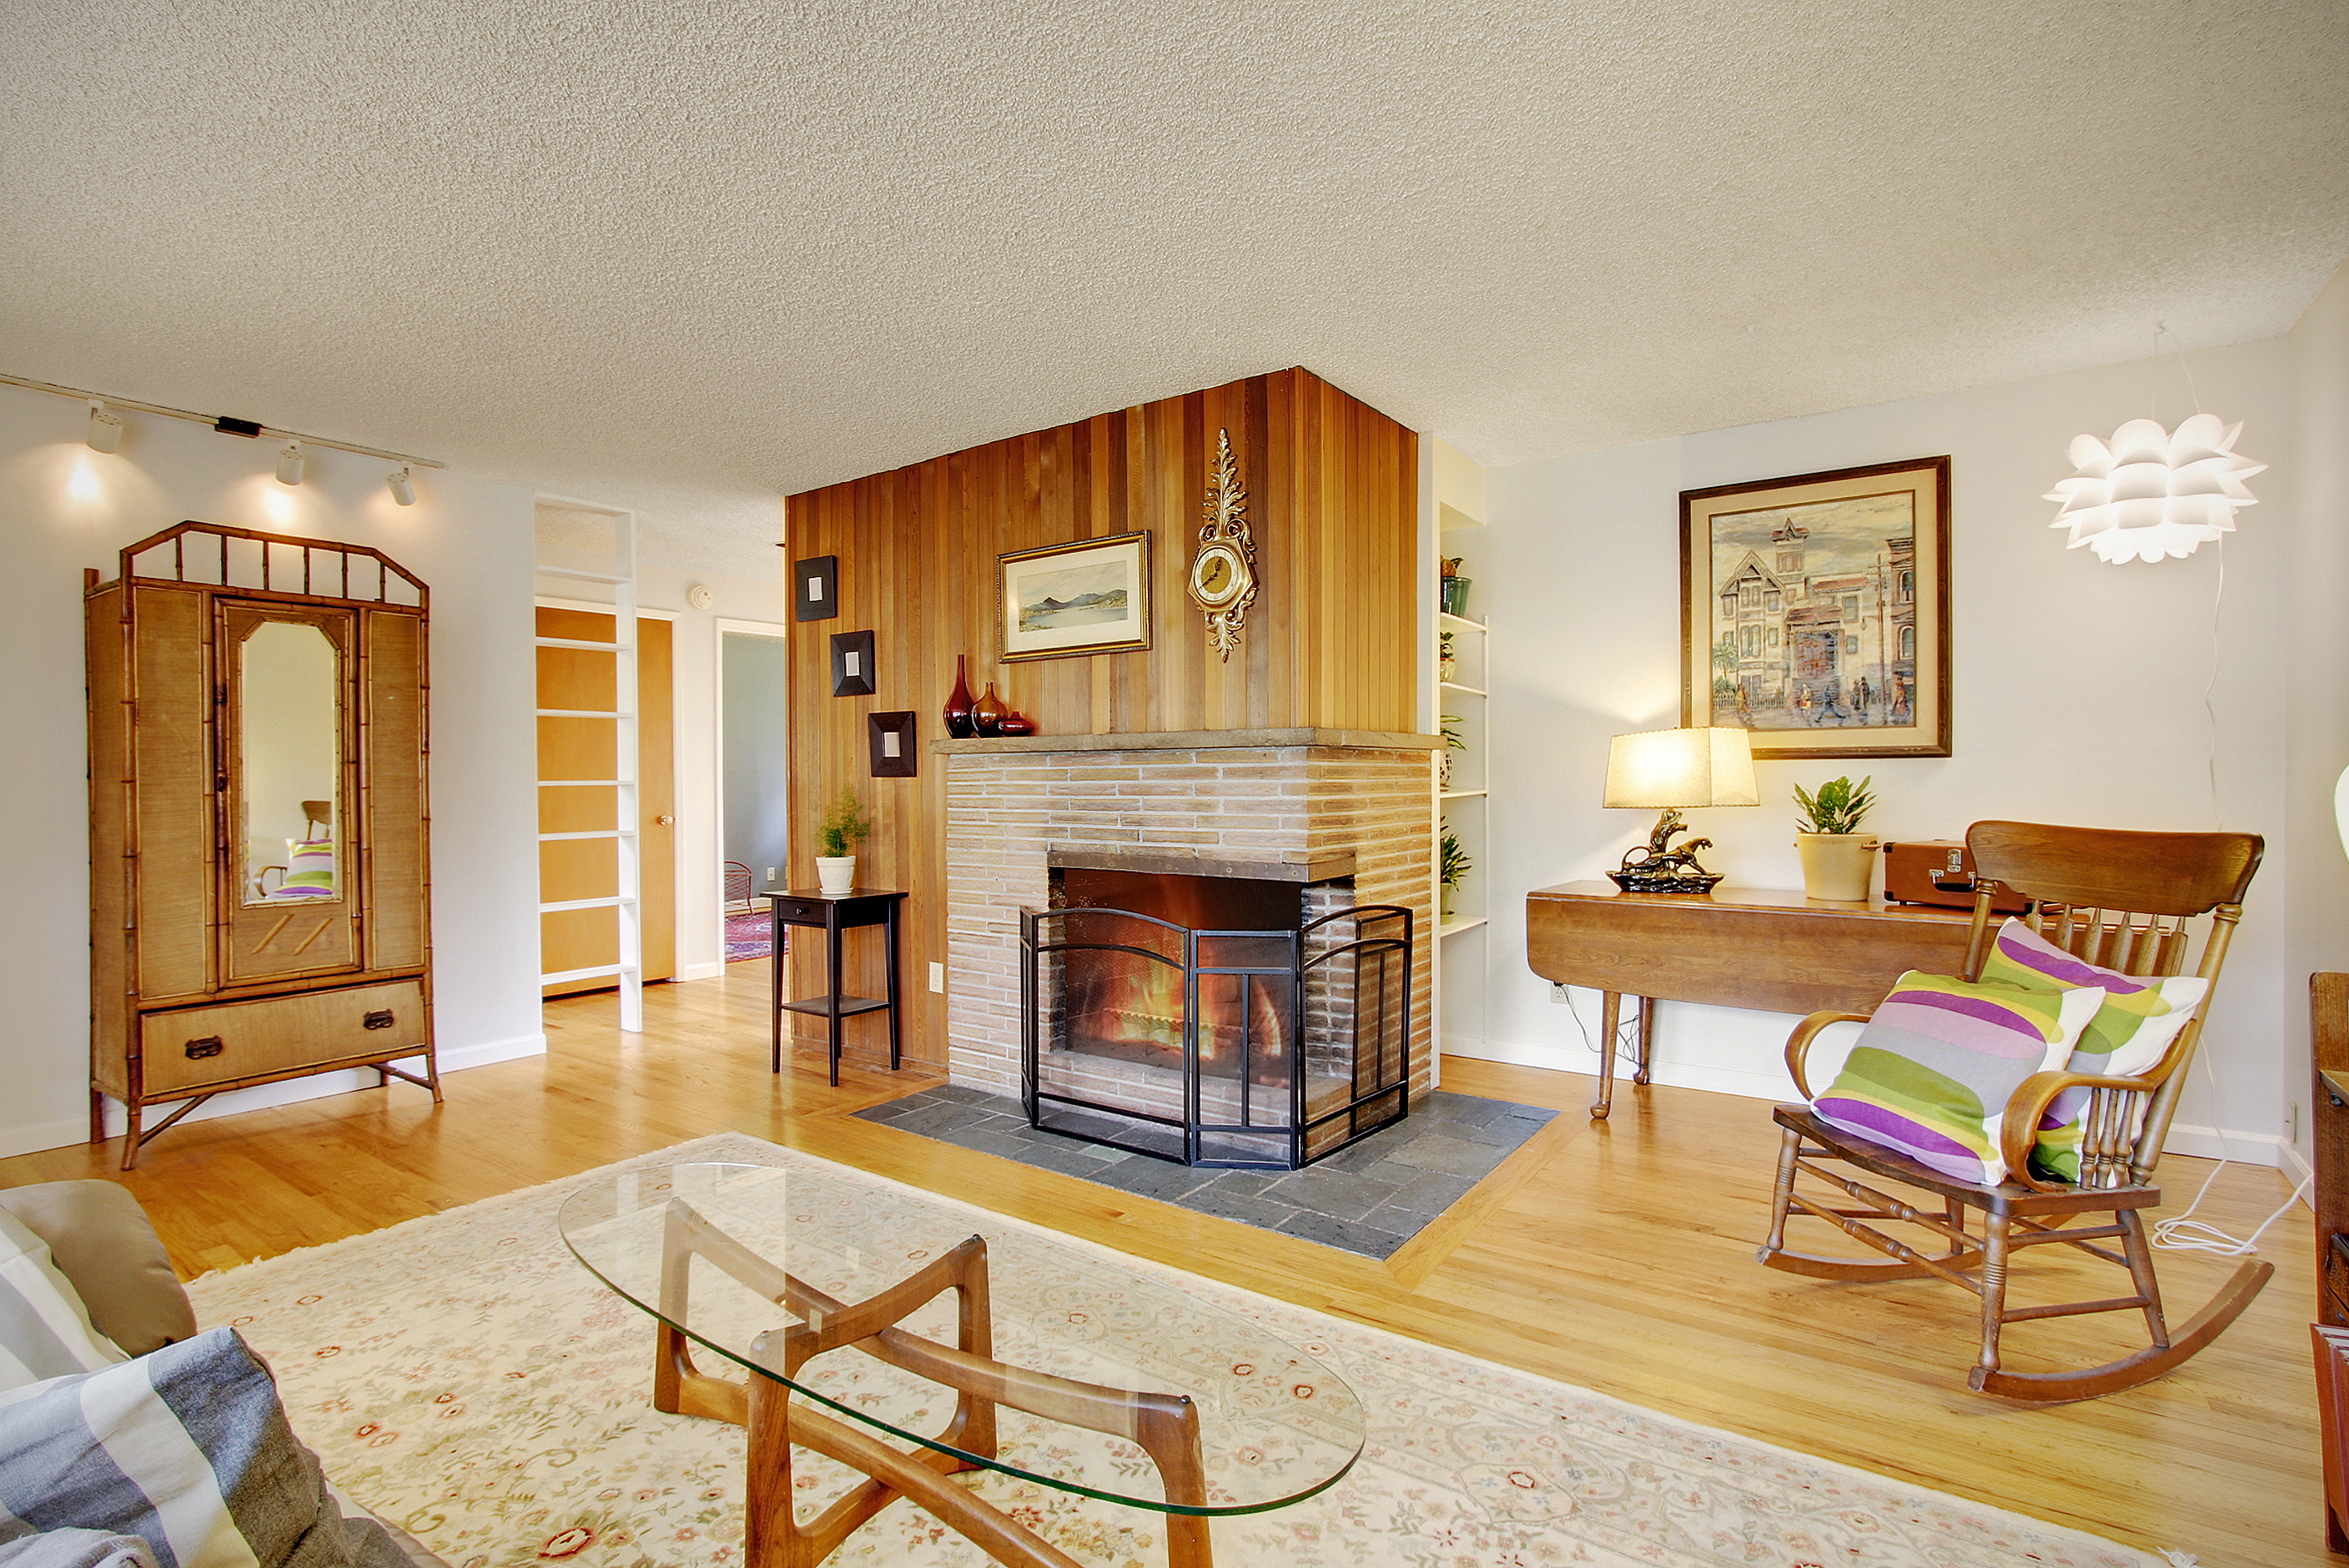 Property Photo: Living room and kitchen 1259 N 173rd St  WA 98133 